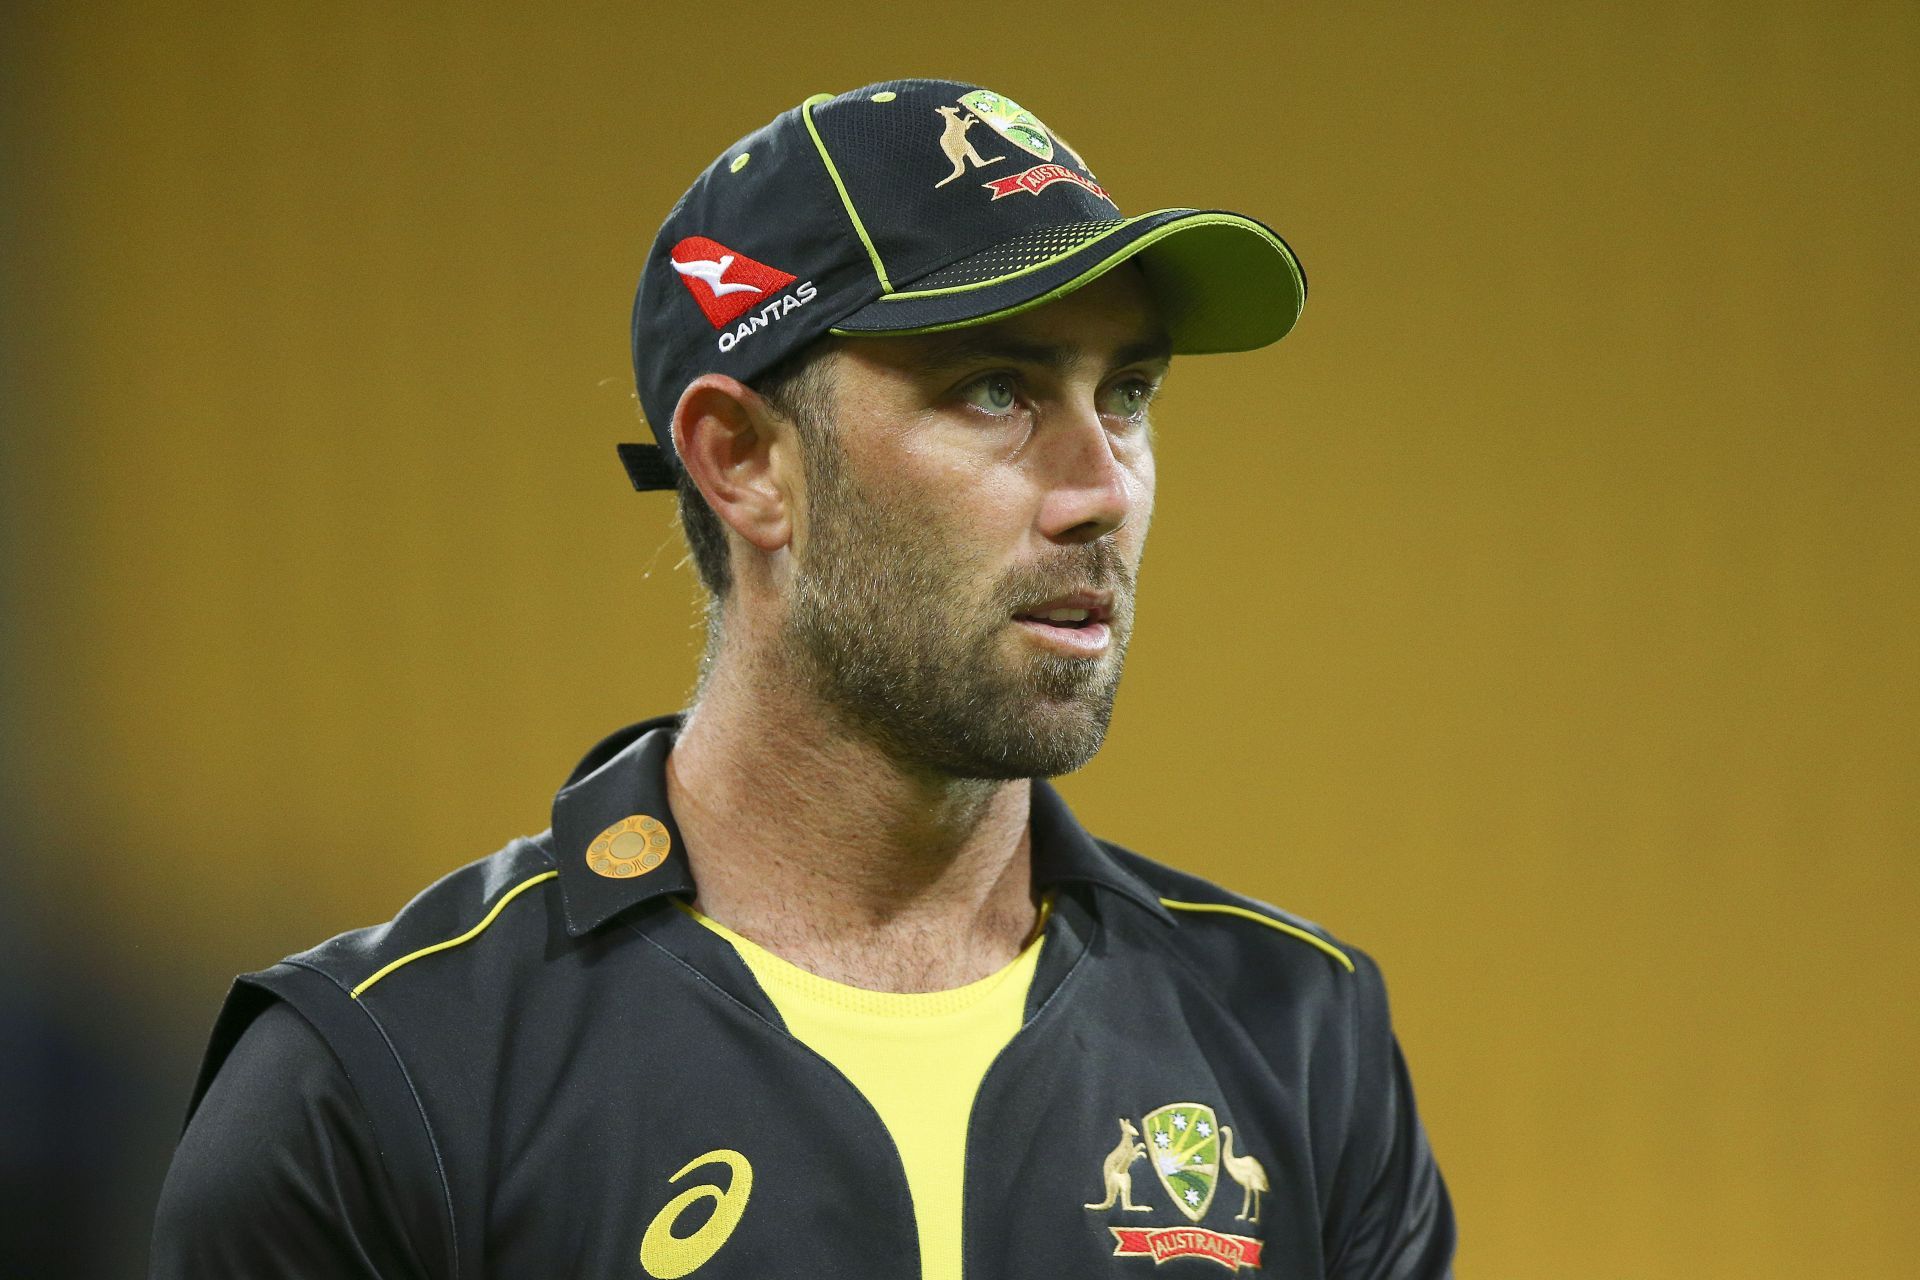 Glenn Maxwell will continue playing for the Royal Challengers Bangalore